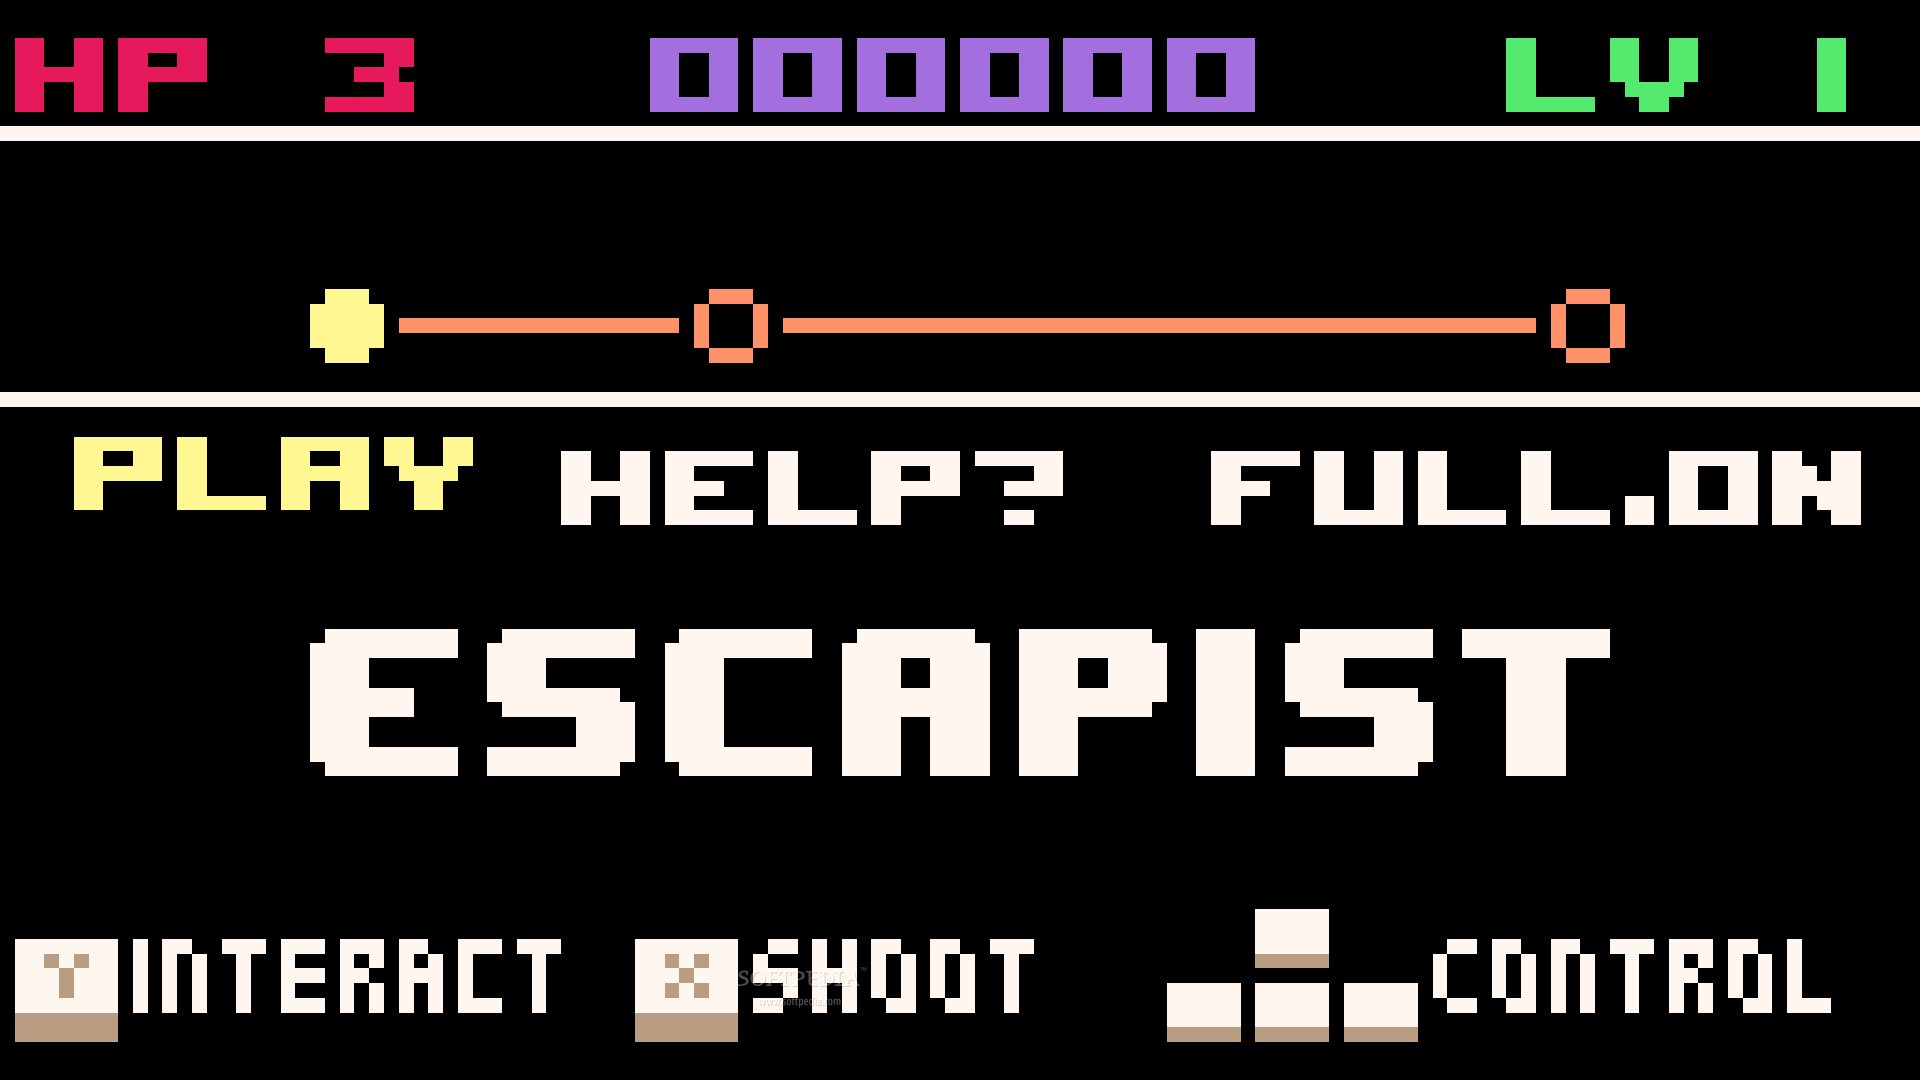 the escapist game free demo unblocked